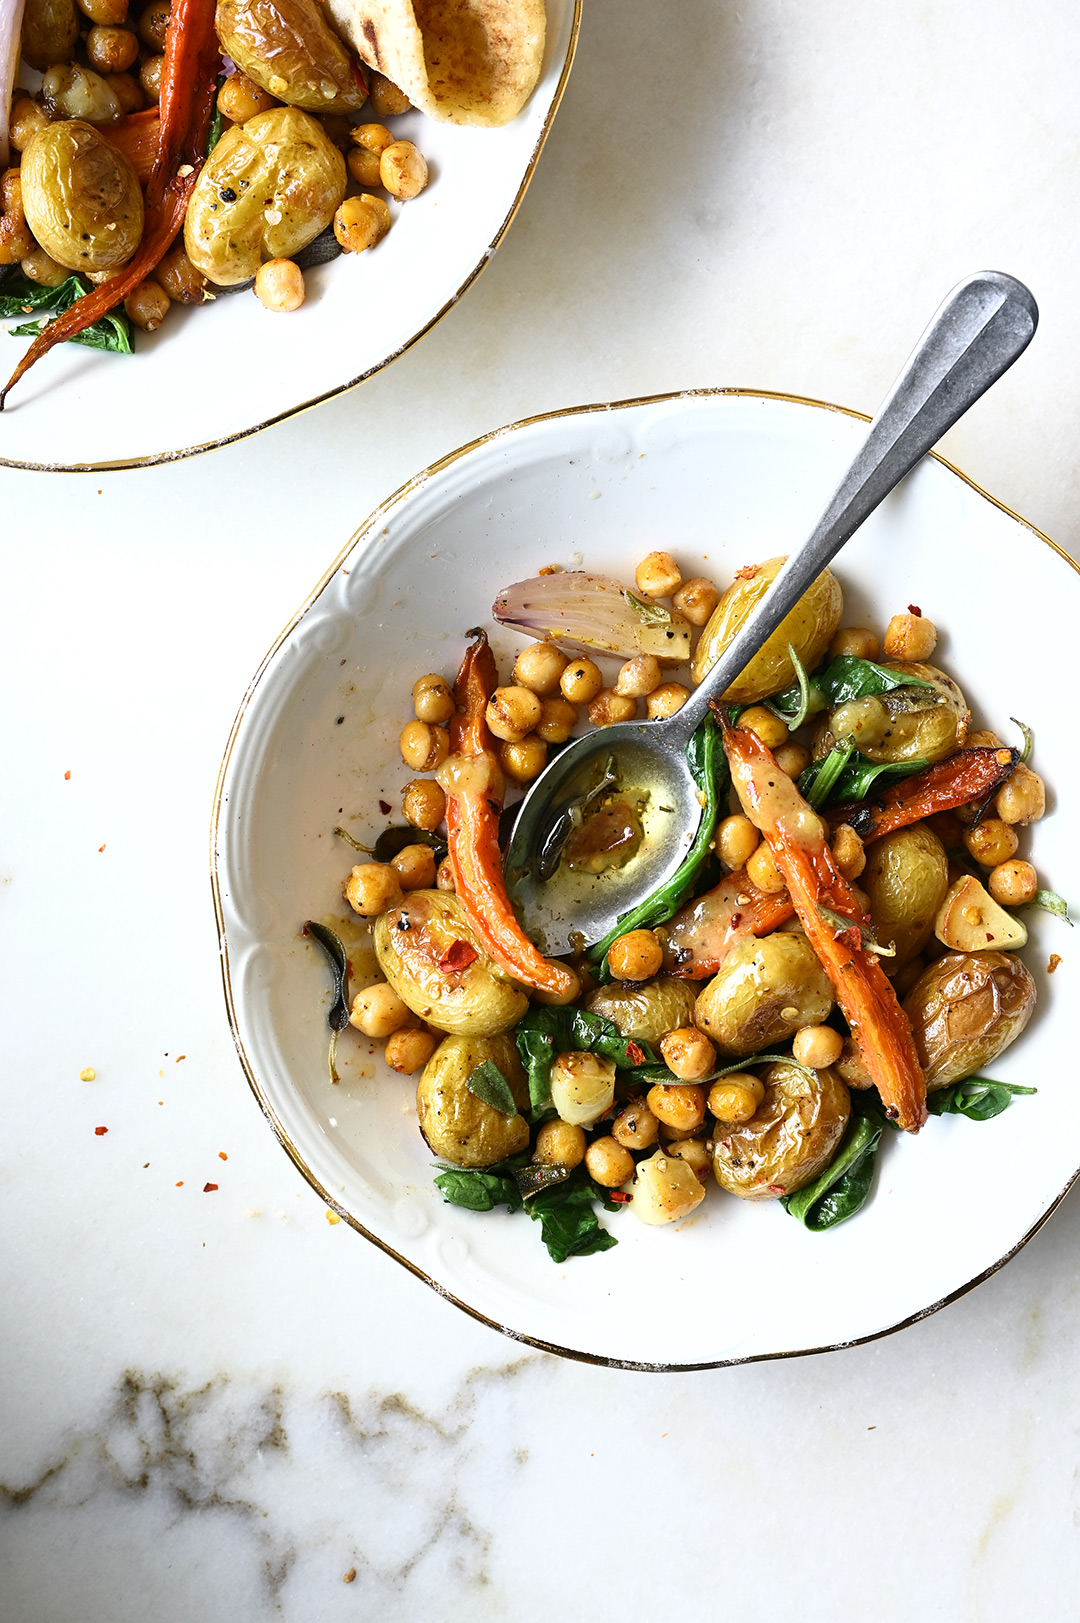 serving dumplings | Easy roasted potato and crunchy chickpea salad